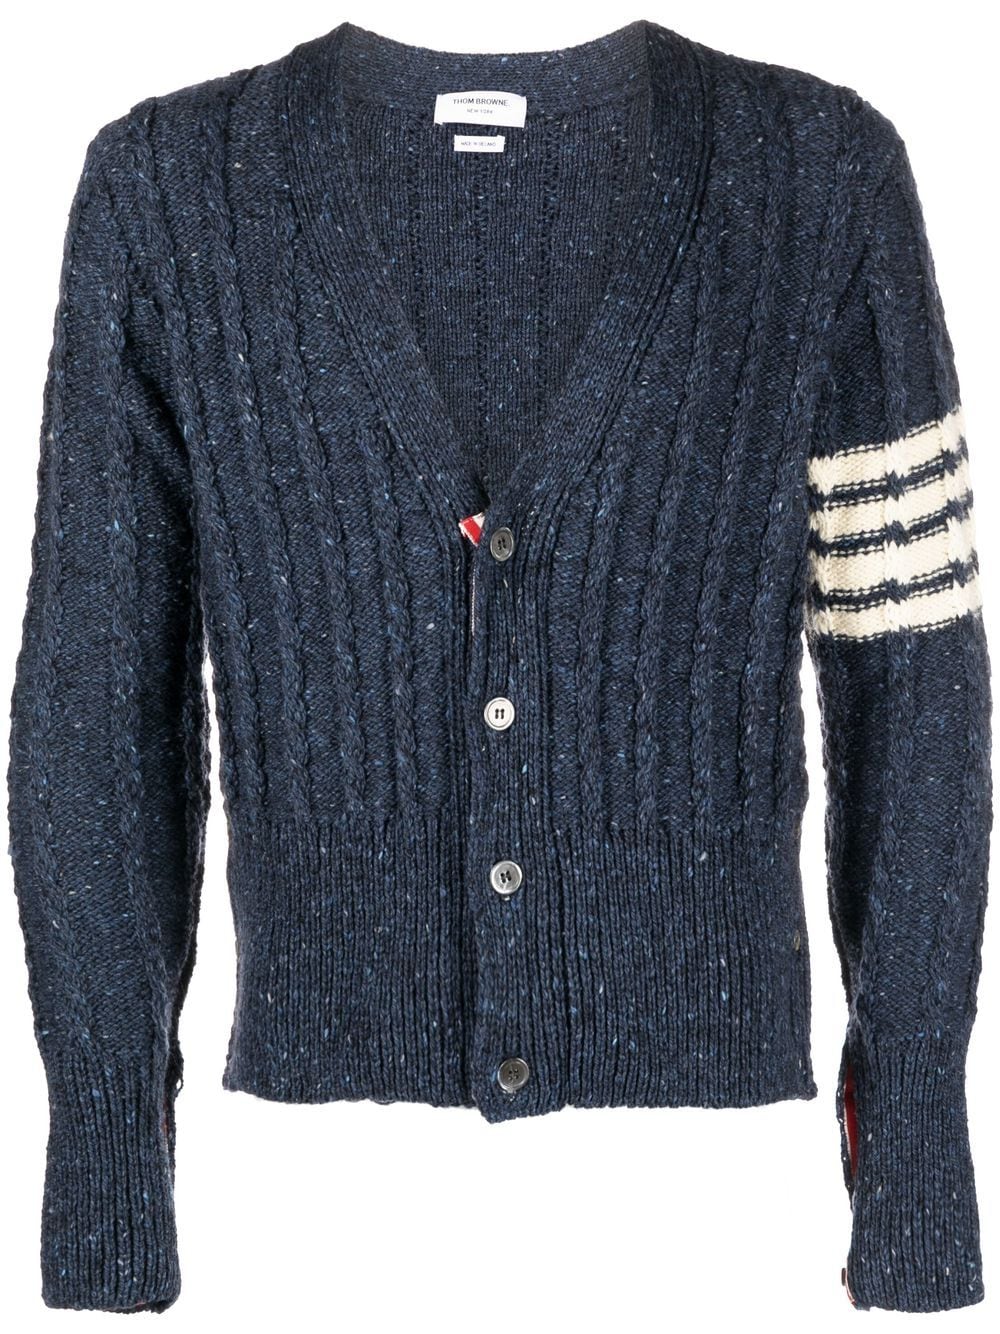 Thom Browne, Donegal Twist Cable 4-Bar Cardigan